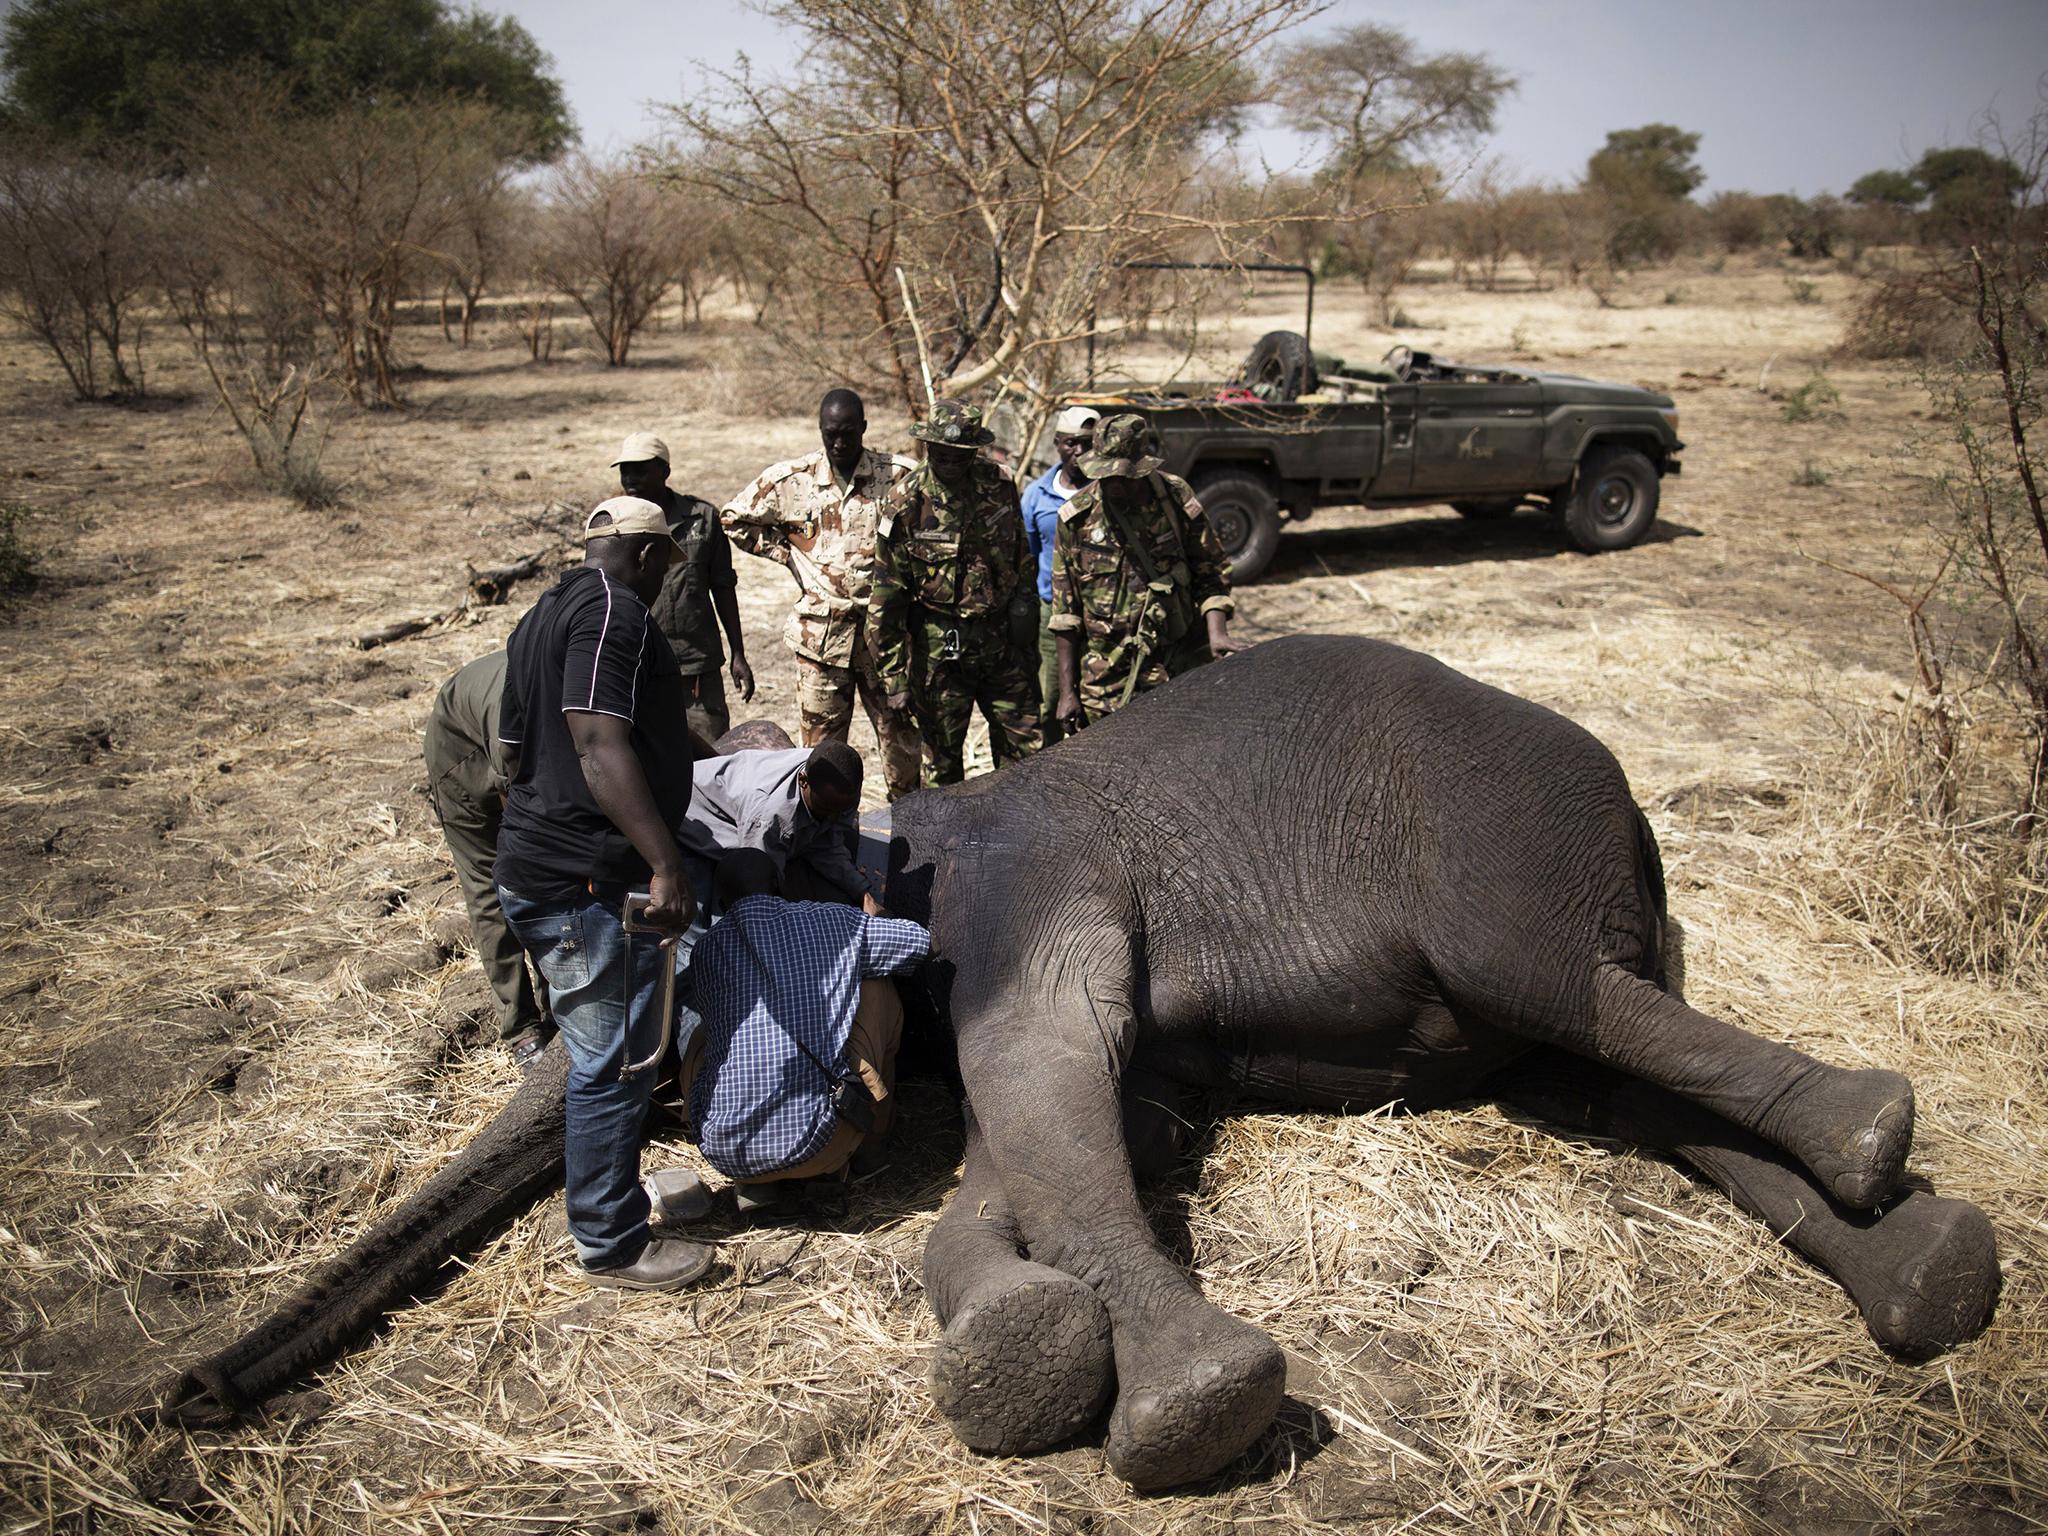 A sedated elephant is fitted with a radio collar that will in the future relay its position, increasing the chances to protect him against poachers